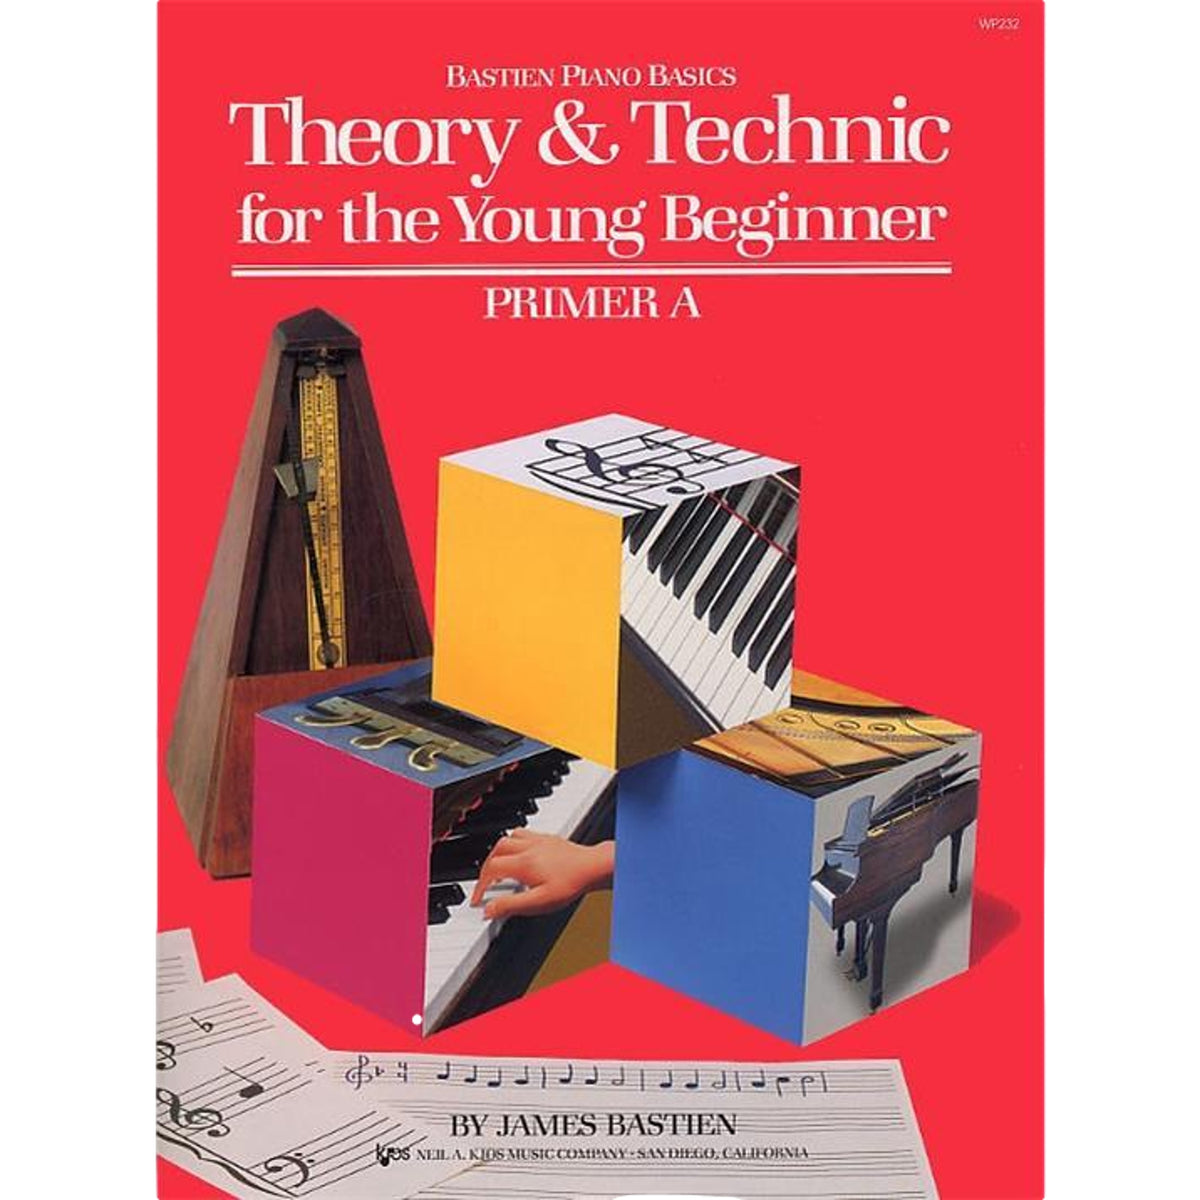 Bastien Piano Basics Theory and Technique for the Young Beginner Primer A